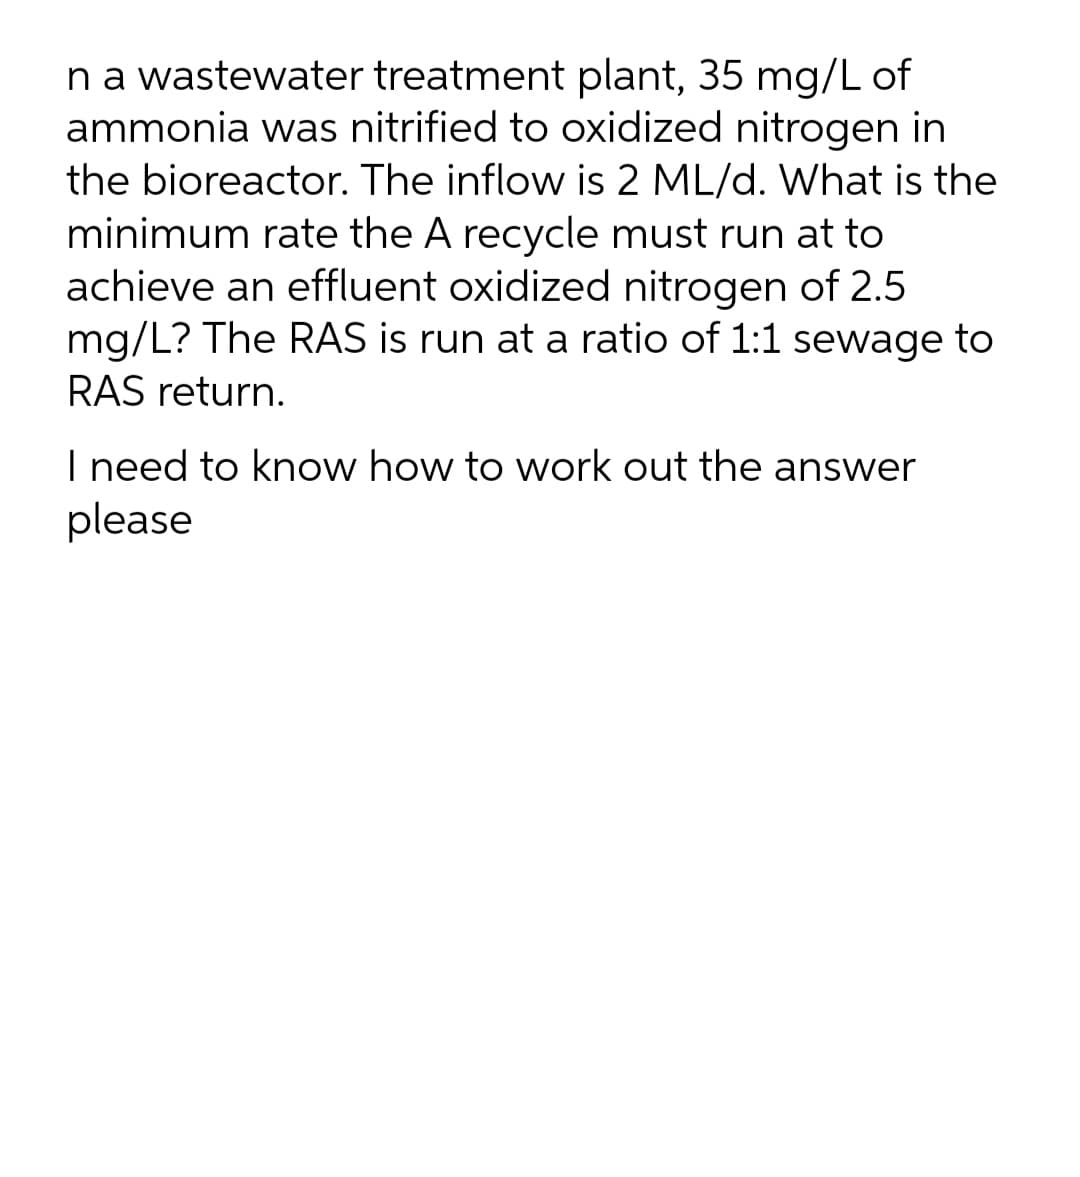 na wastewater treatment plant, 35 mg/L of
ammonia was nitrified to oxidized nitrogen in
the bioreactor. The inflow is 2 ML/d. What is the
minimum rate the A recycle must run at to
achieve an effluent oxidized nitrogen of 2.5
mg/L? The RAS is run at a ratio of 1:1 sewage to
RAS return.
I need to know how to work out the answer
please
